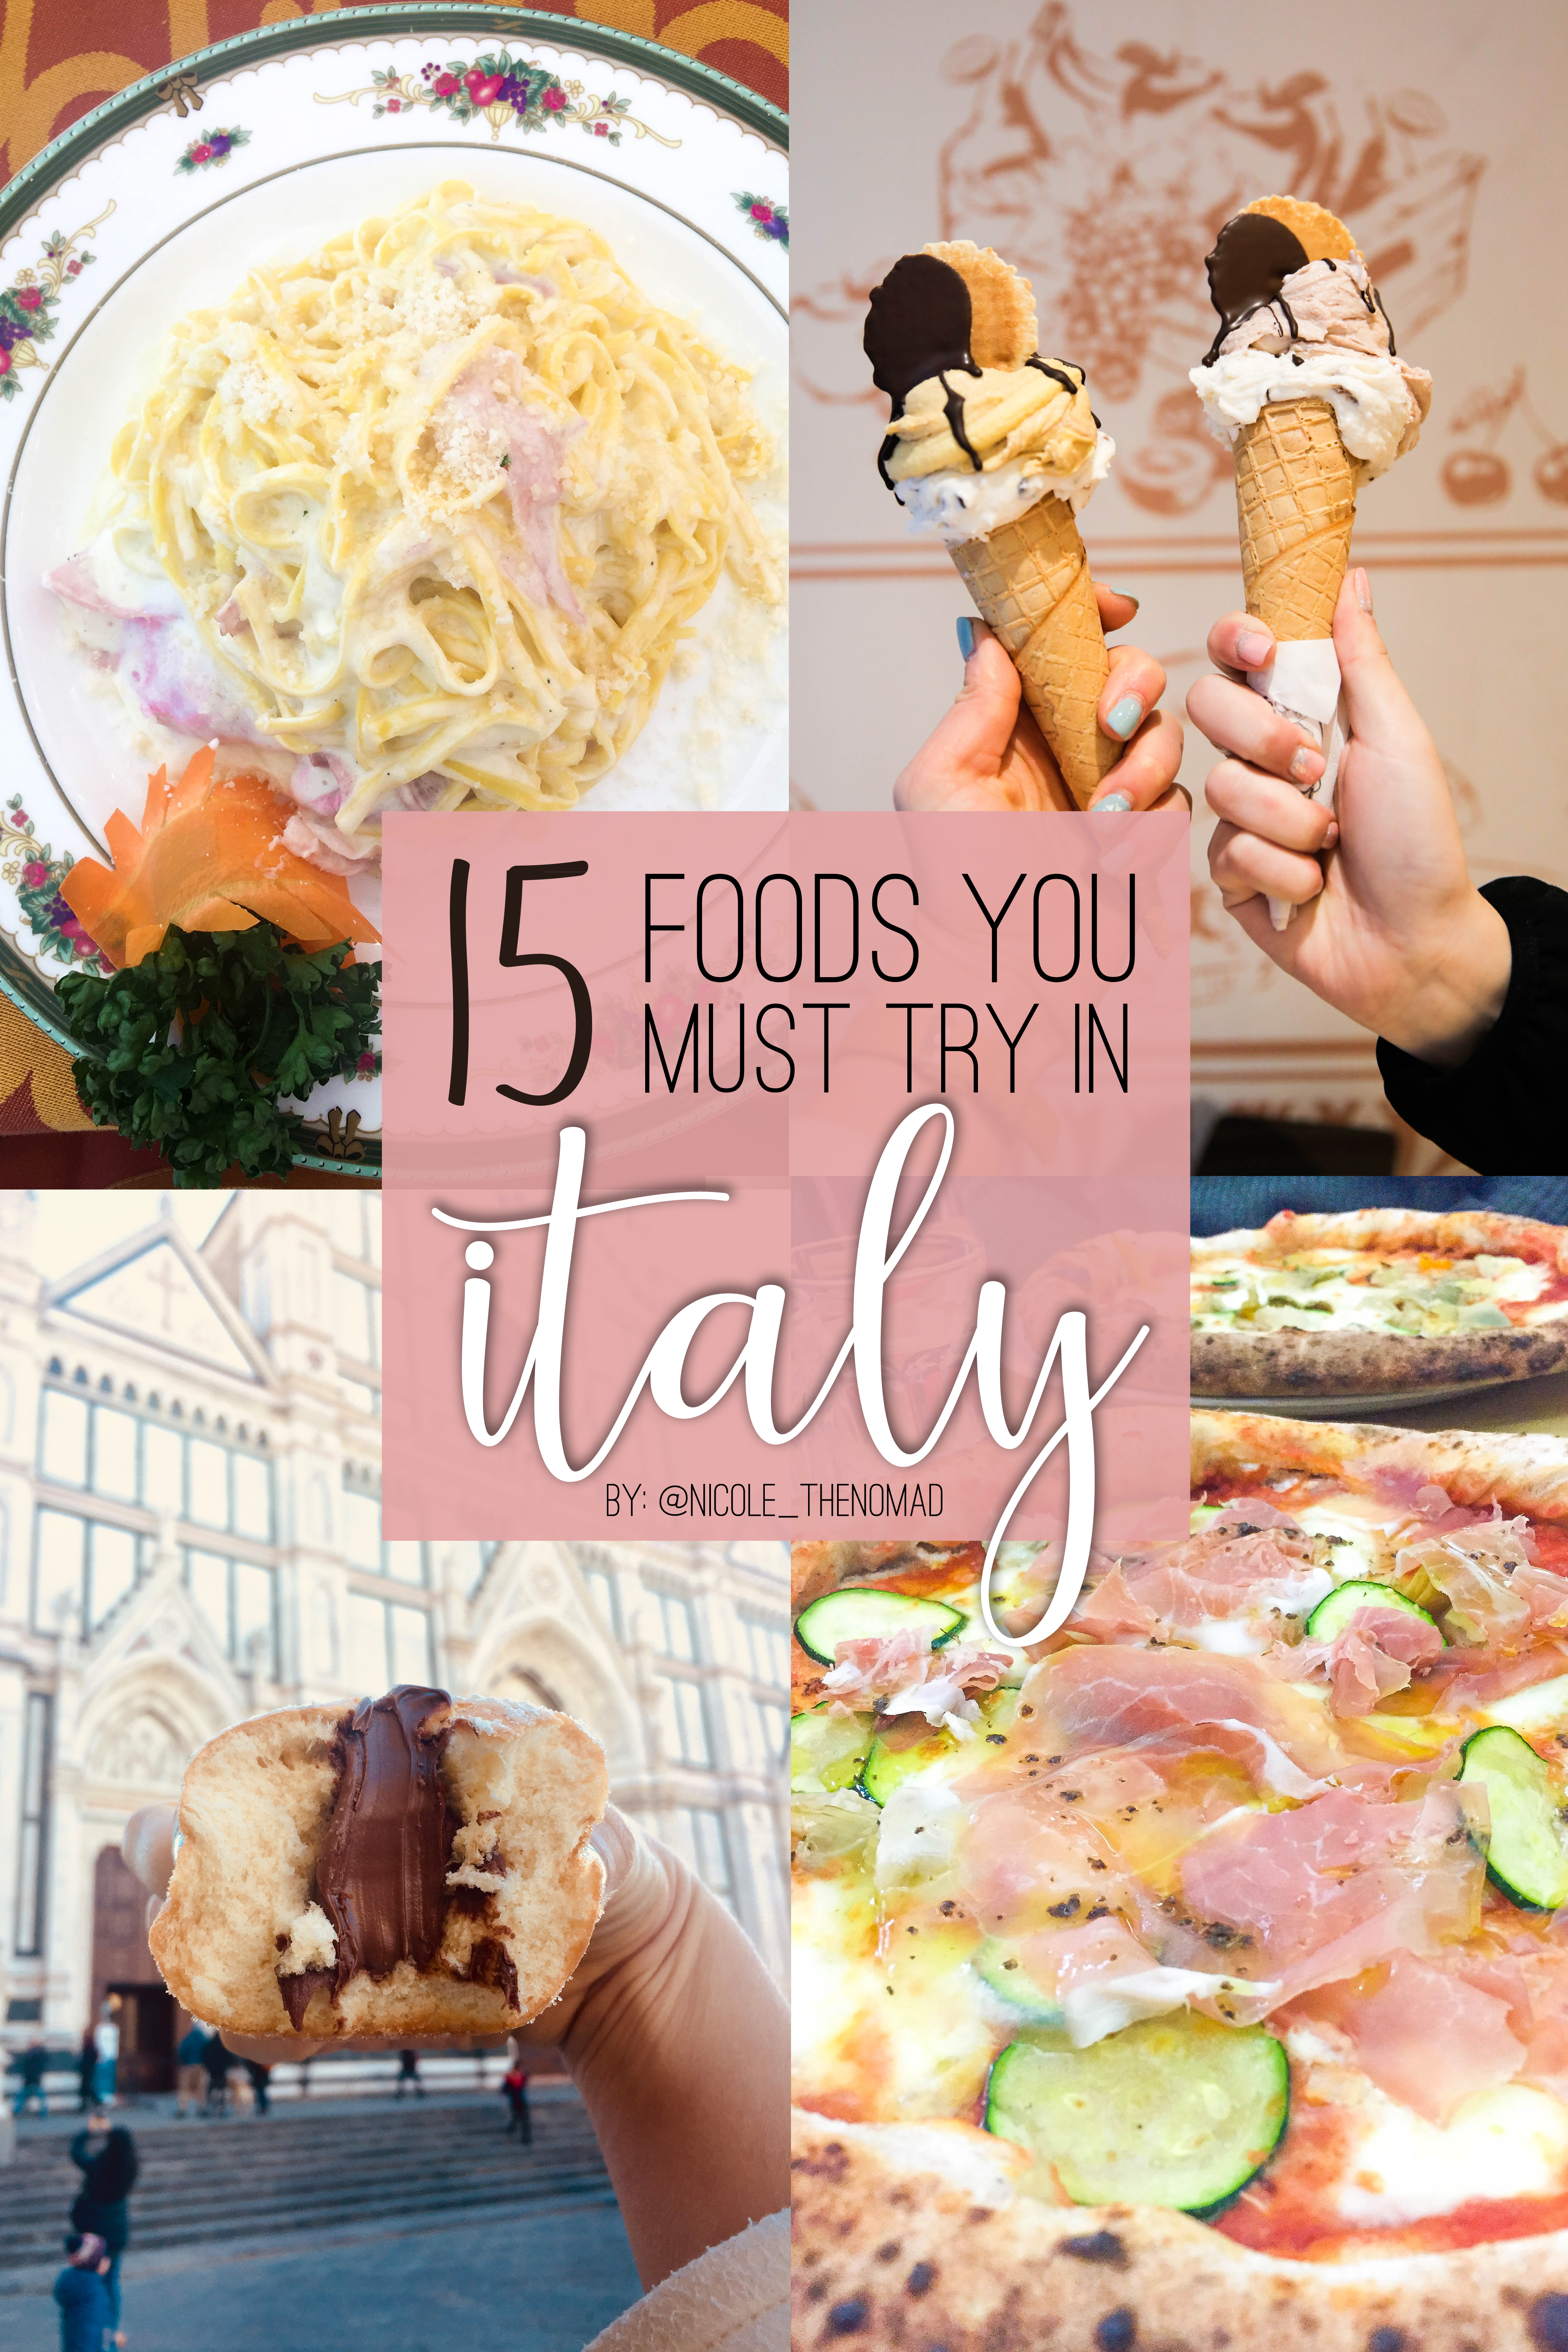 15 foods you MUST try in Italy